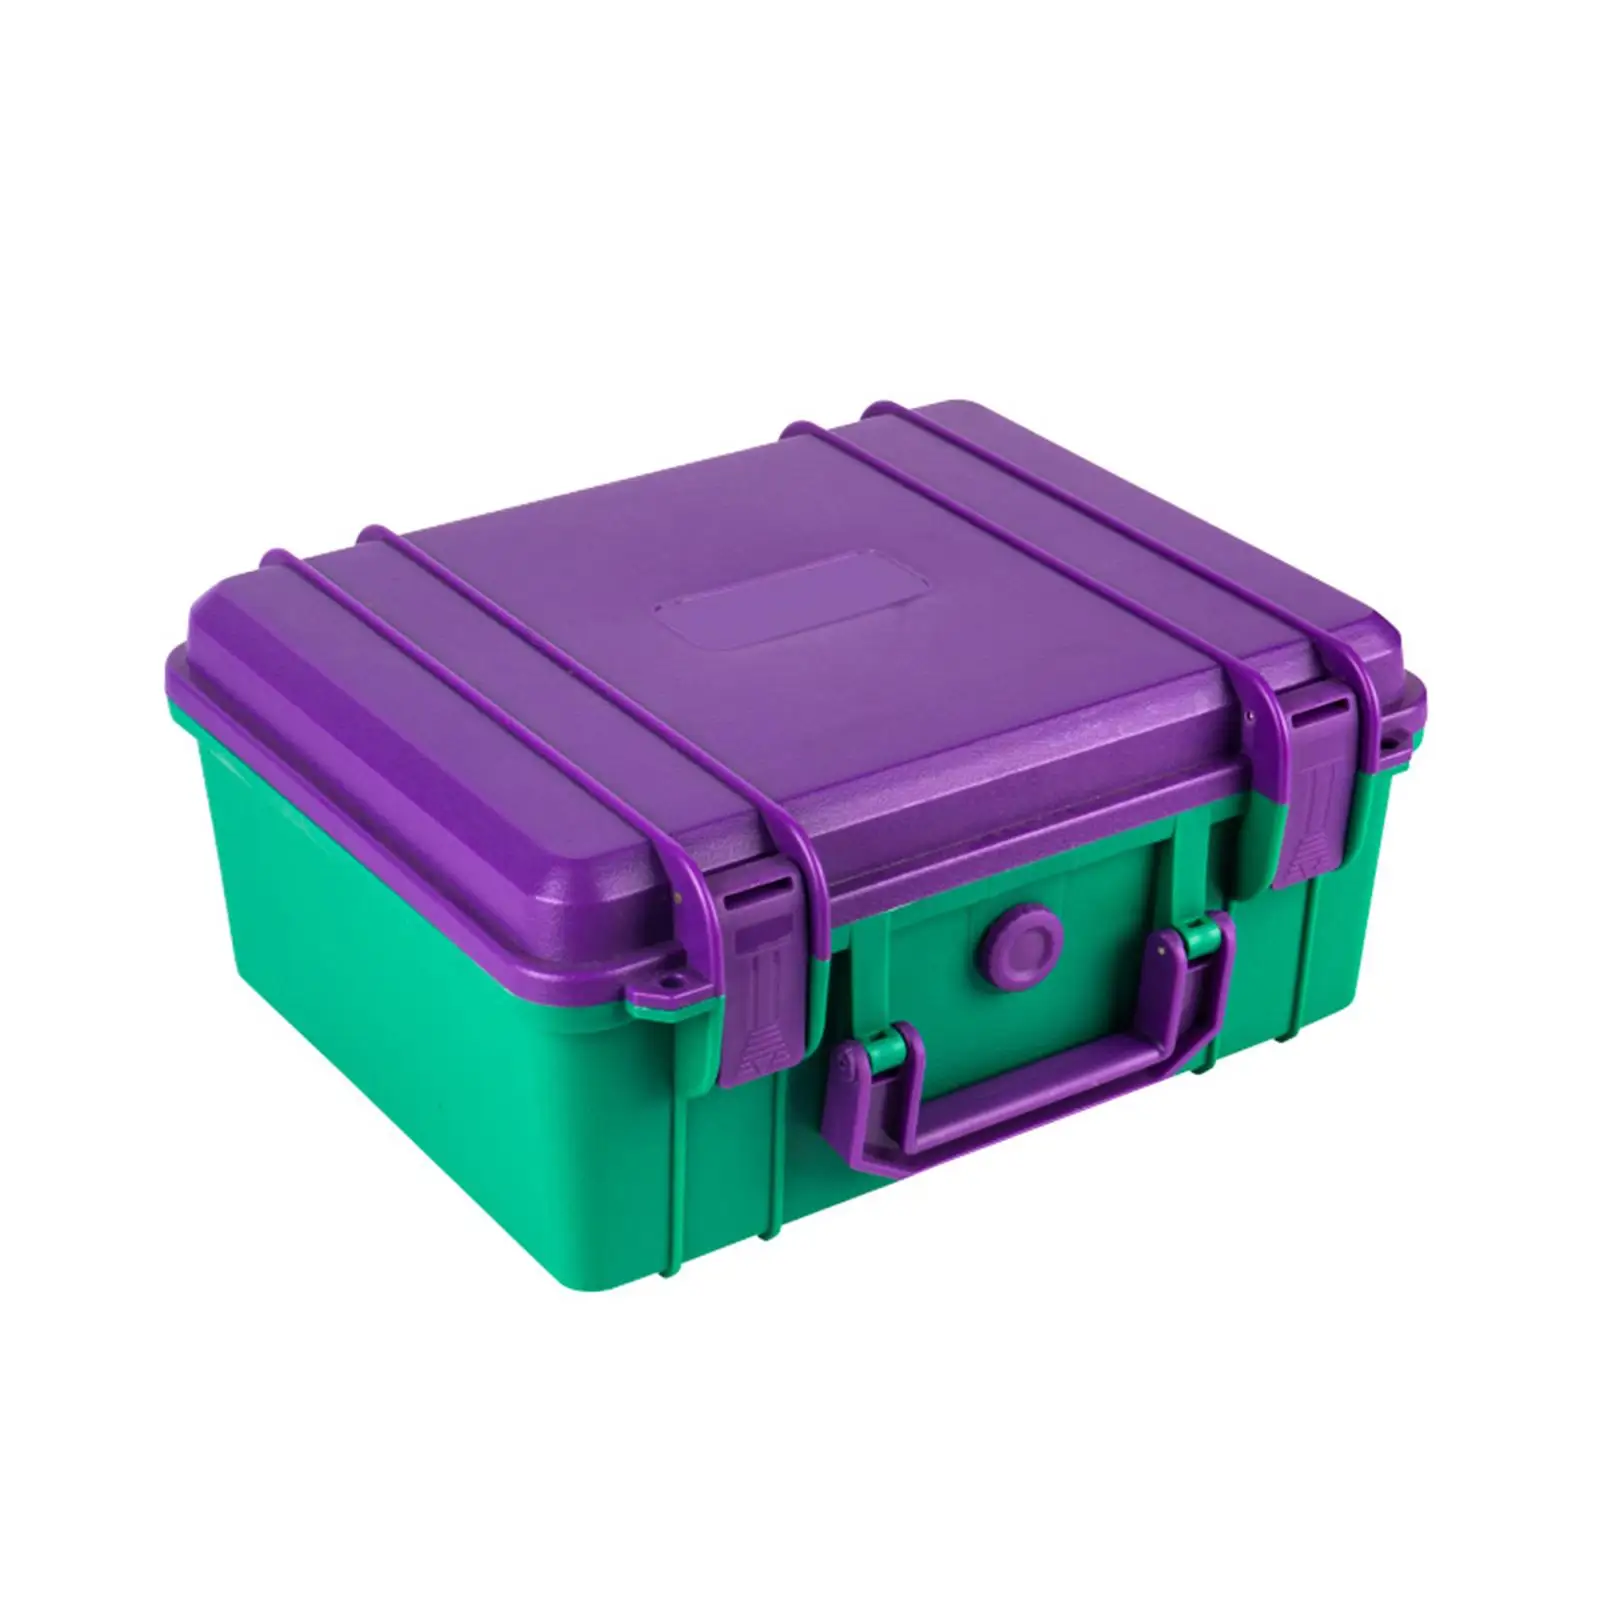 Weatherproof Hard Case Portable Impact Resistant Violet and Green Shockproof Outdoor Camping Accessories Sealed Waterproof Box